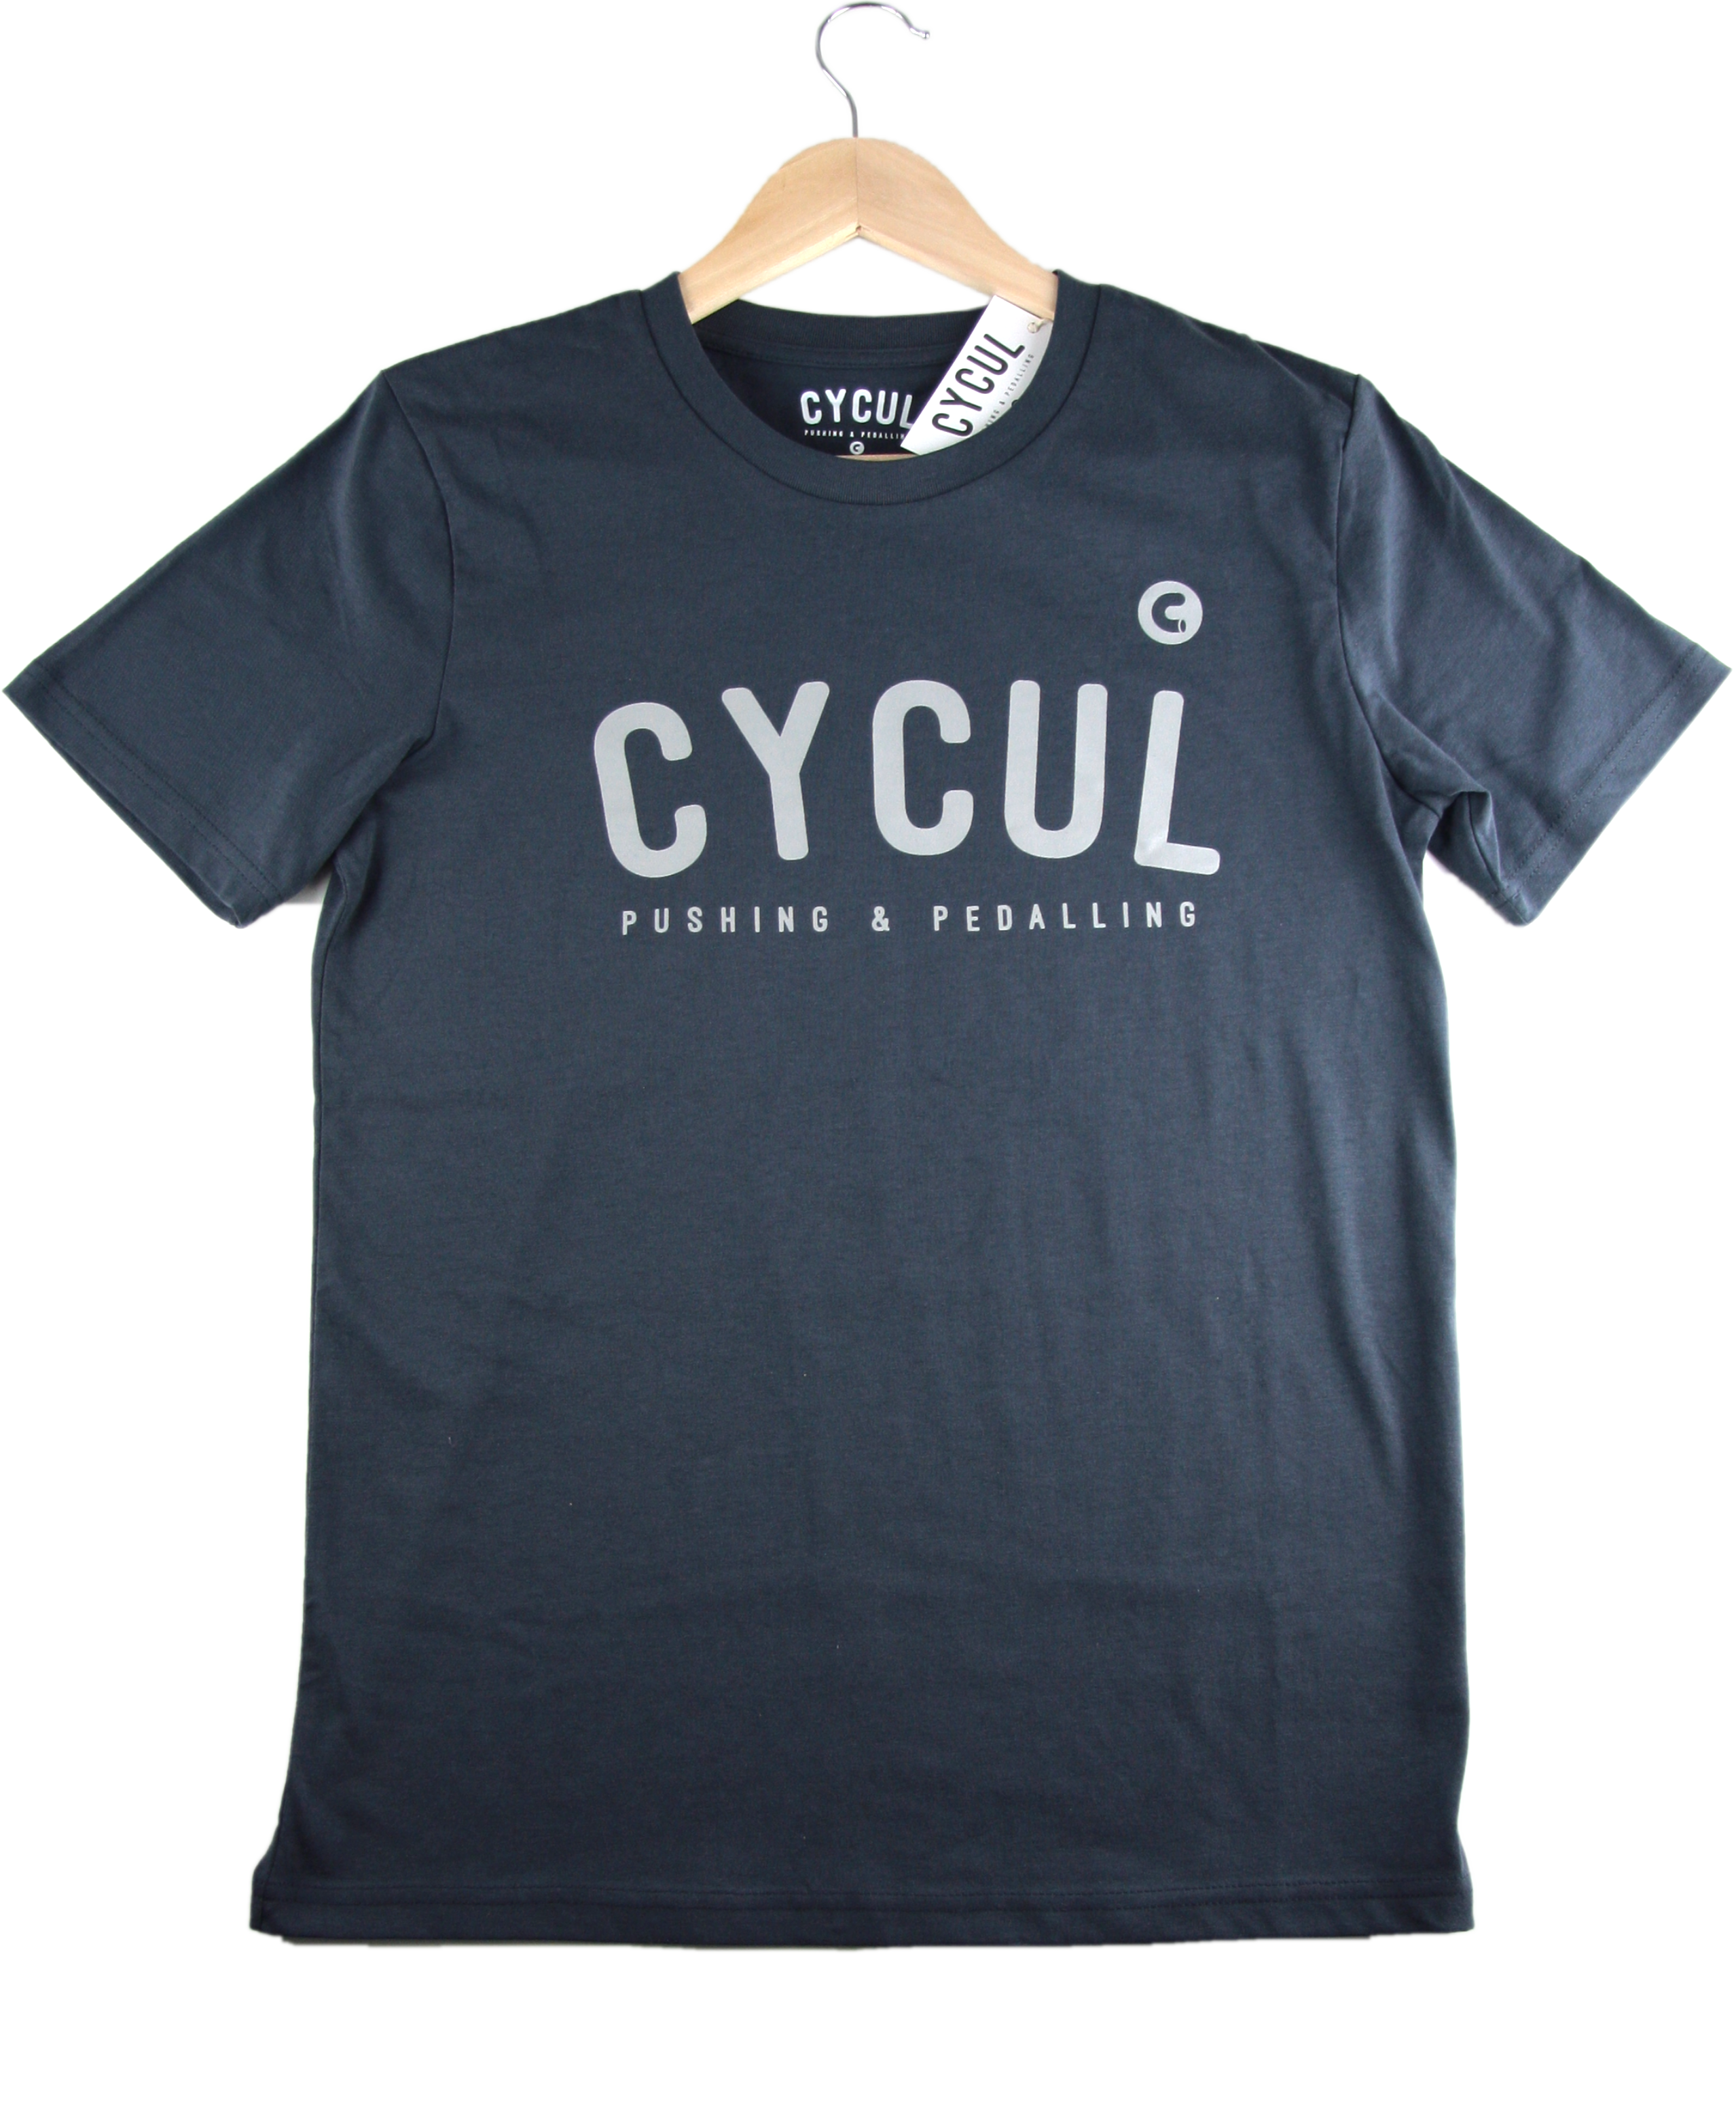 Cycul - Pushing & Pedalling (Indian Ink)